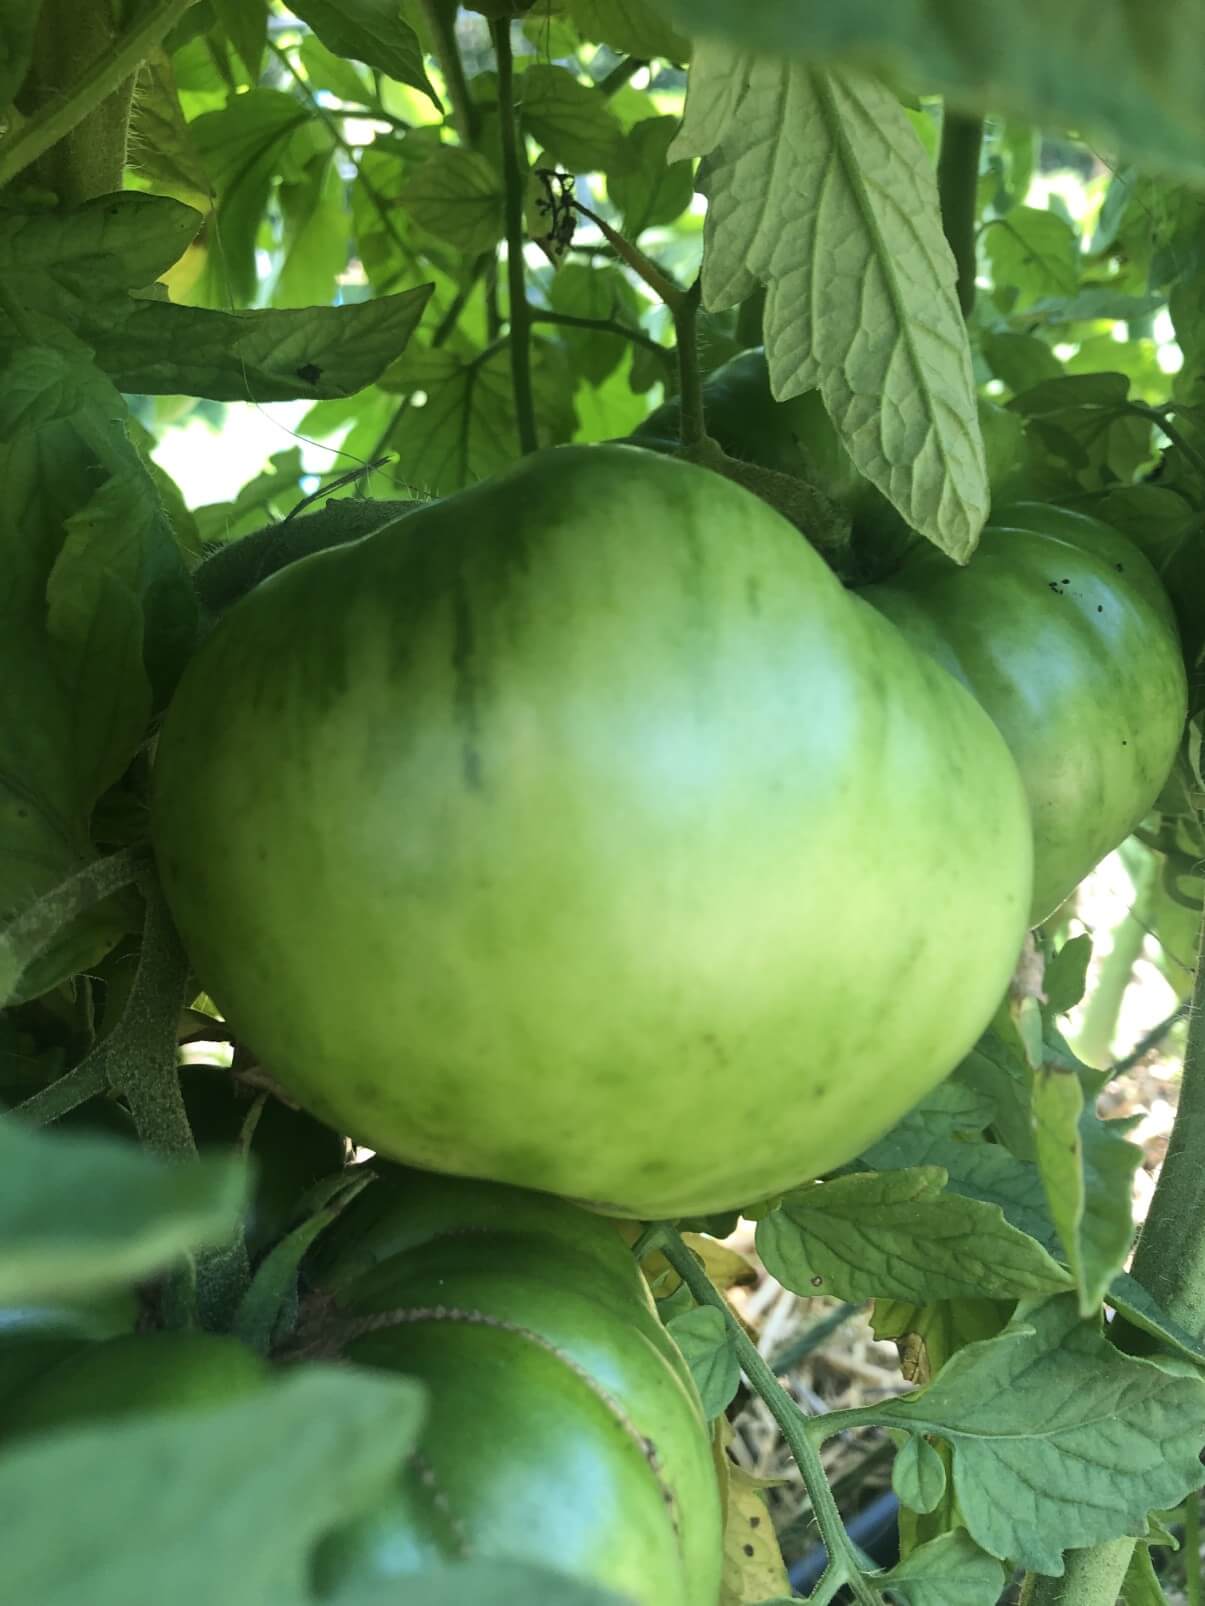 green tomato on the vine ready for picking